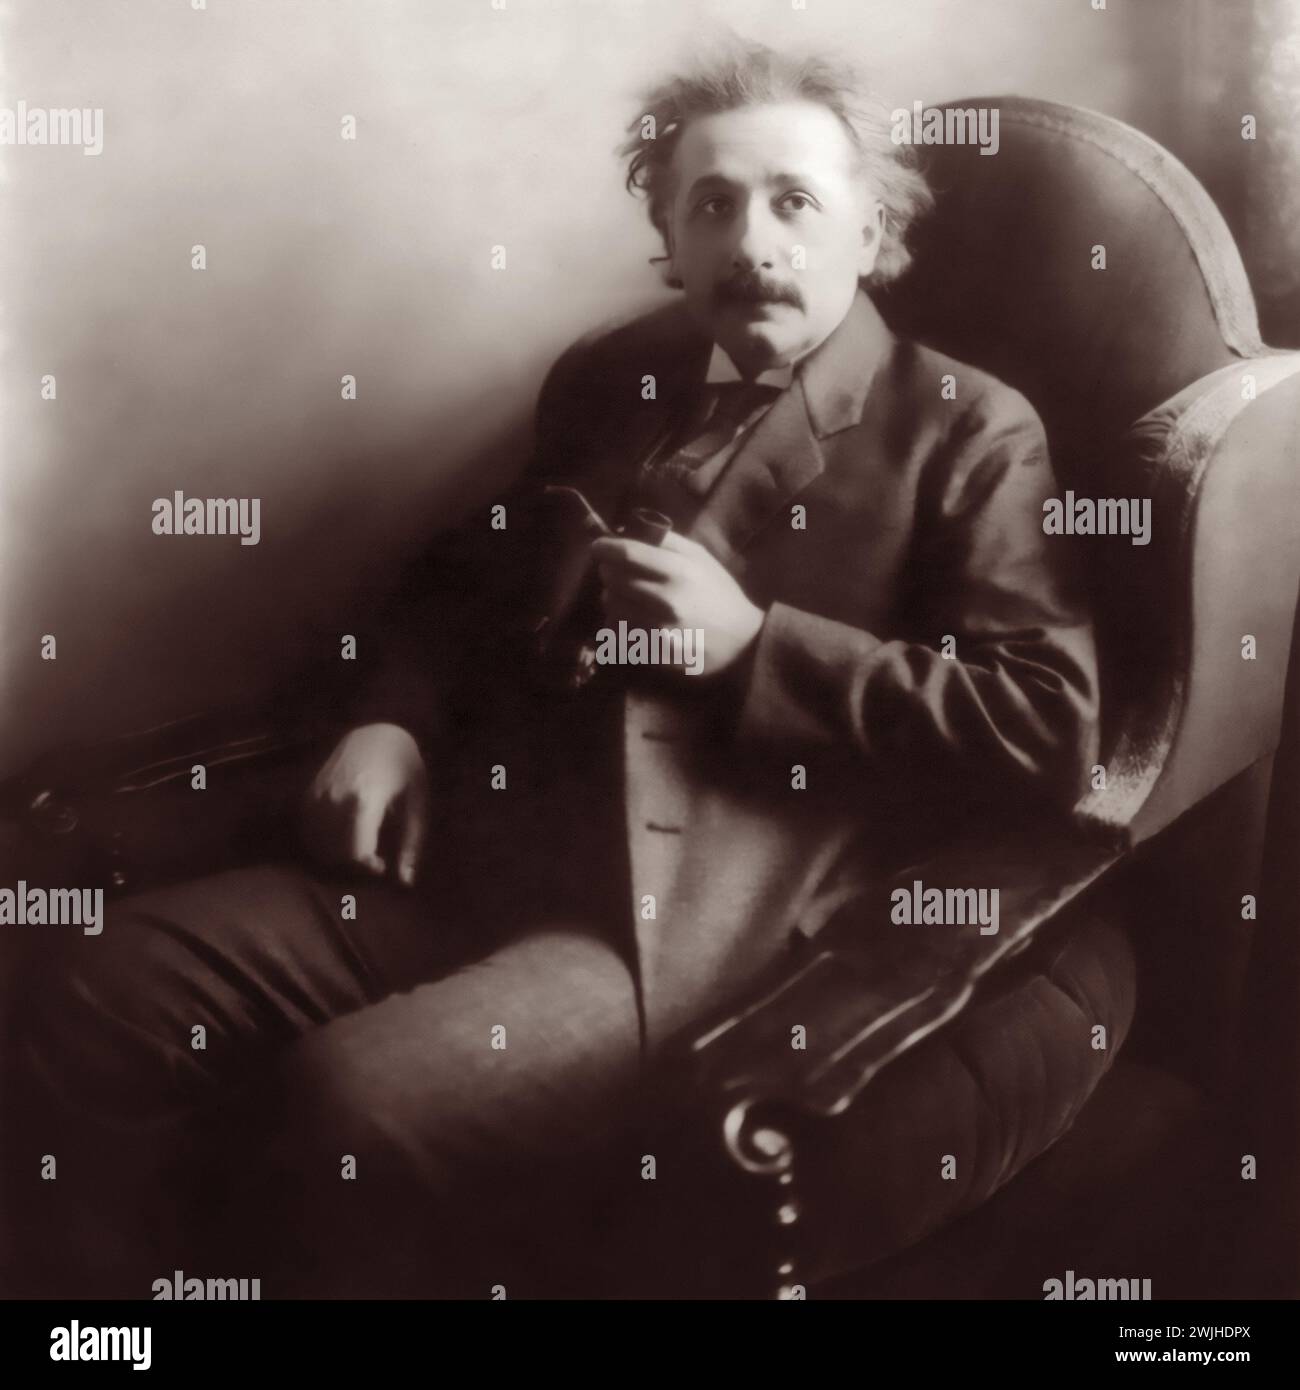 Albert Einstein (1879-1955), winner of the 1921 Nobel Prize in Physics, seated with his pipe in 1921. Stock Photo